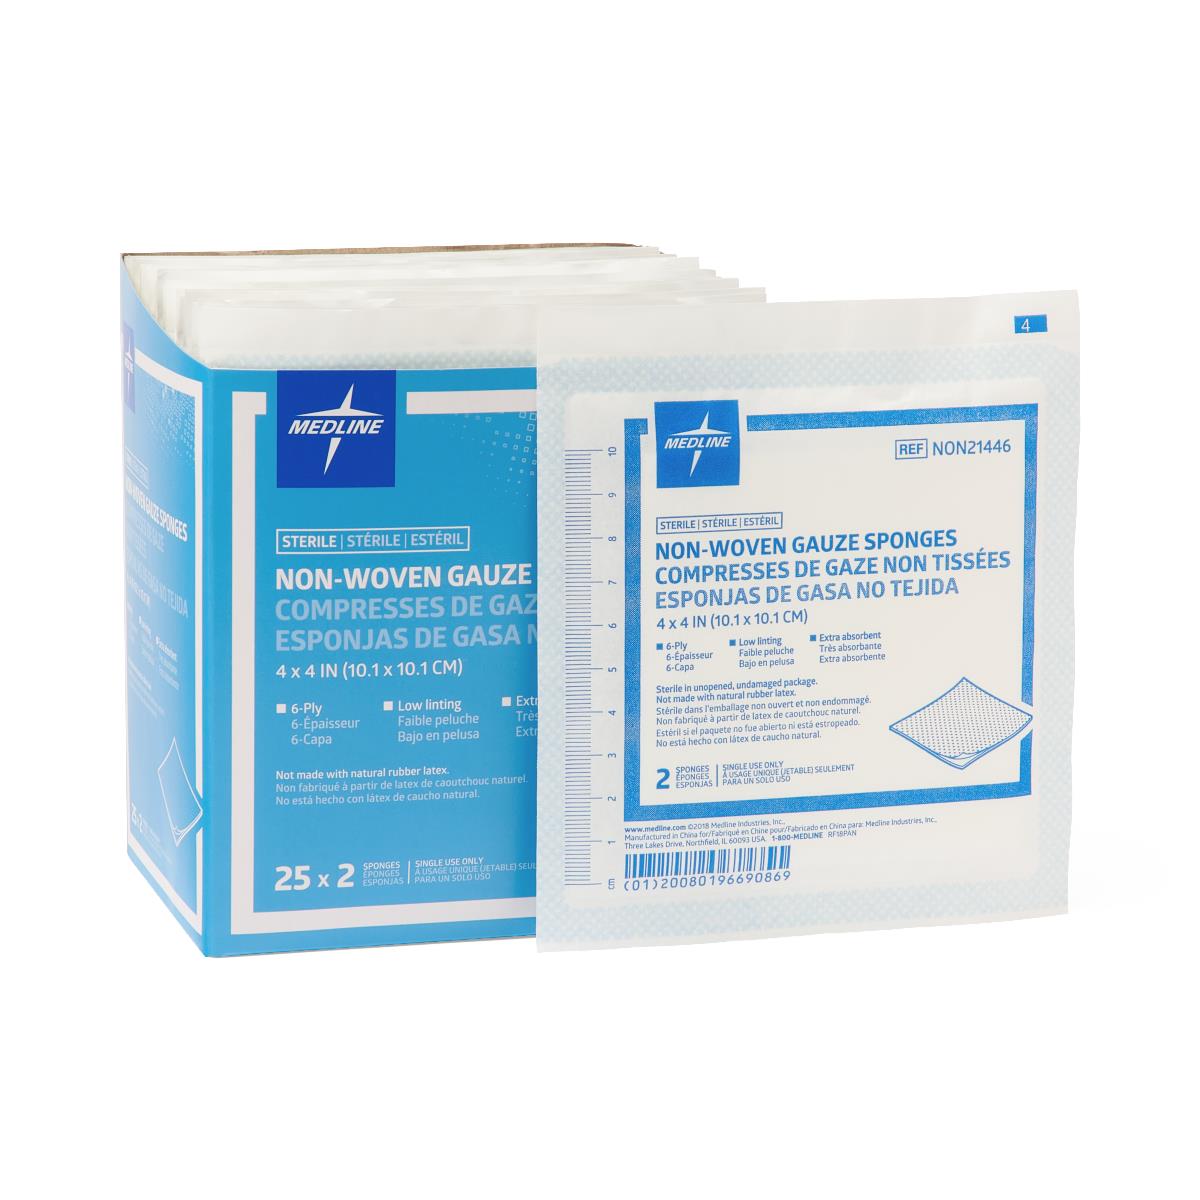 600 Each-Case / 4.00000 IN / Rayon/Polyester Wound Care - MEDLINE - Wasatch Medical Supply